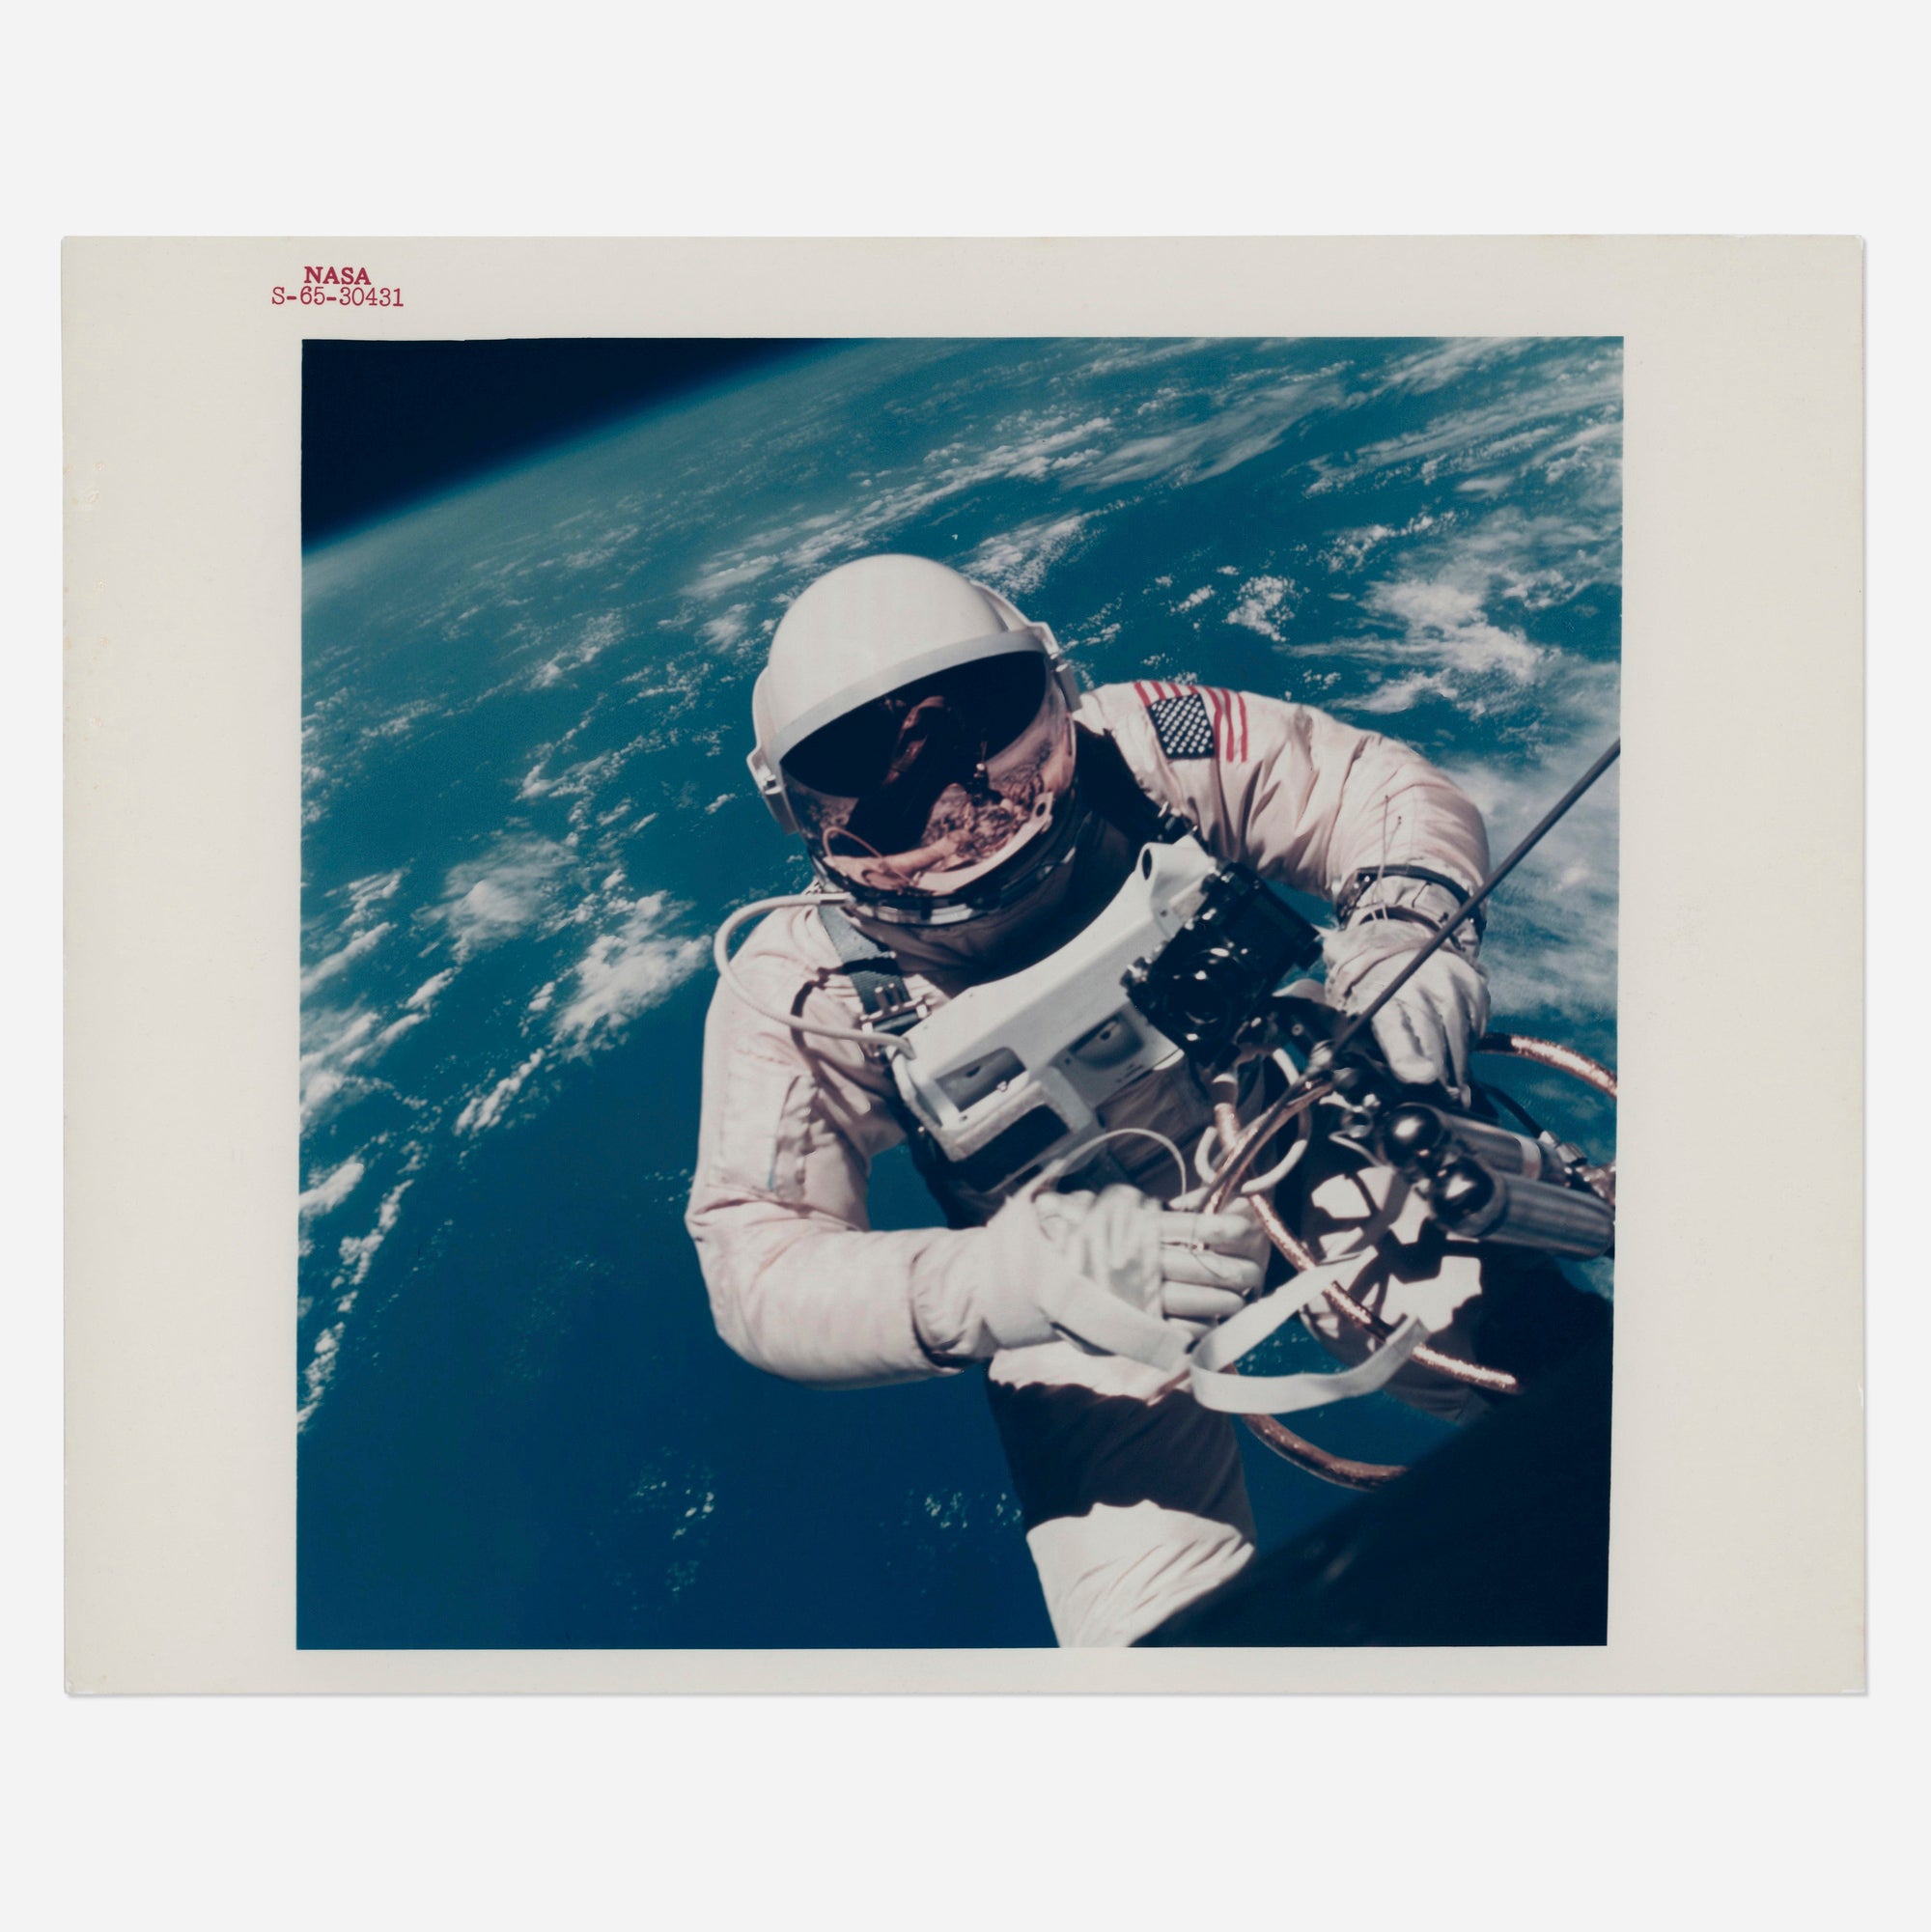 The first photograph of a human being in outer space. 3-7 June 1965.